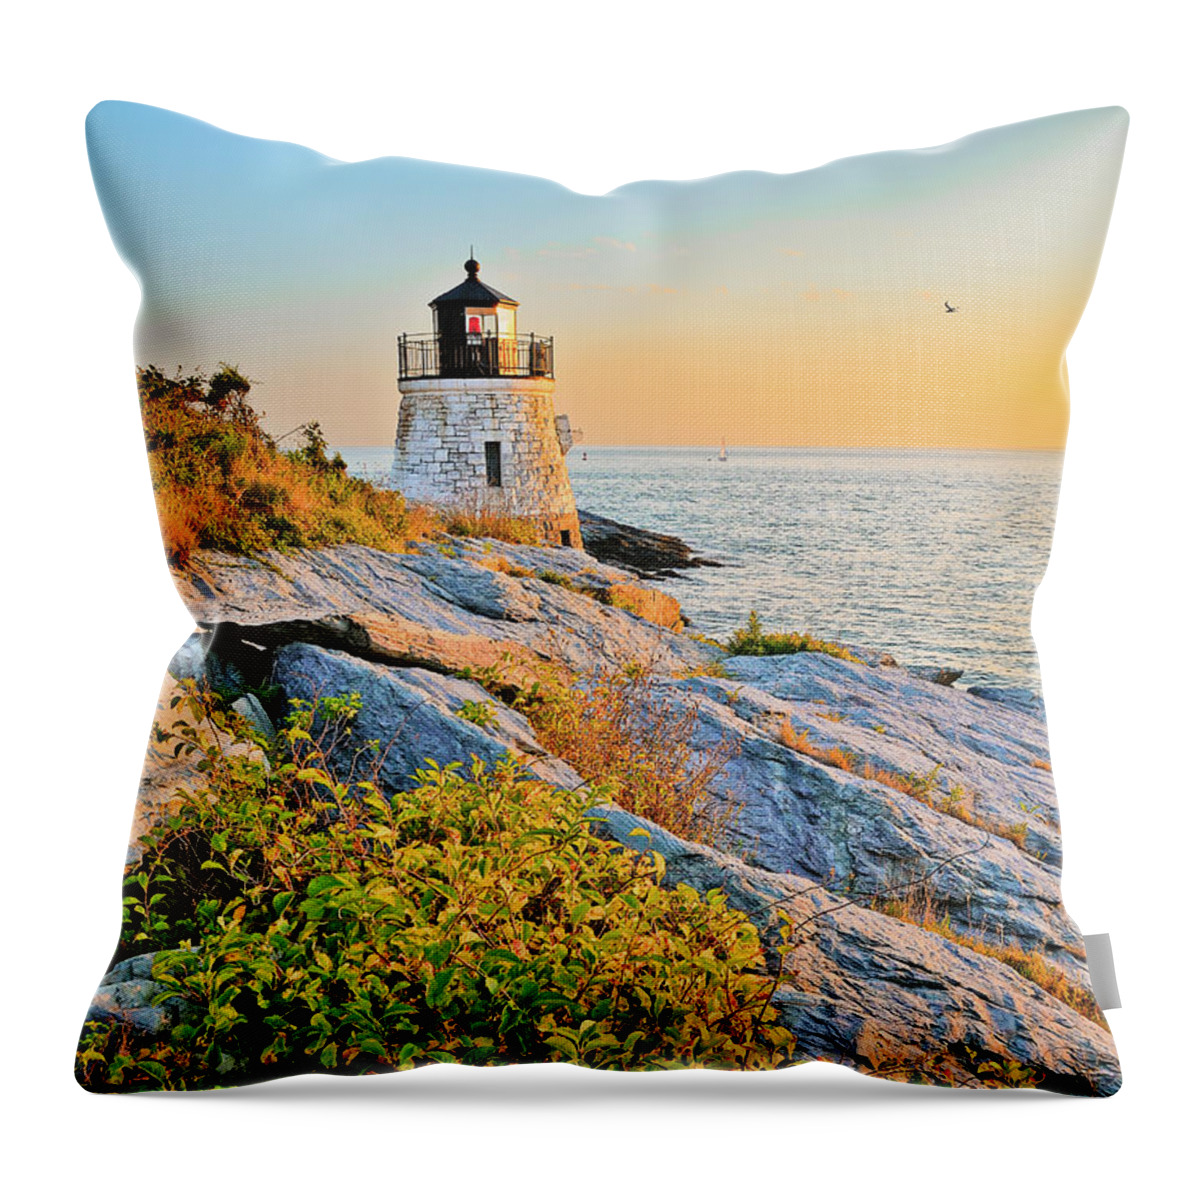 Castle Throw Pillow featuring the photograph Castle Hill Lighthouse 1 Newport by Marianne Campolongo